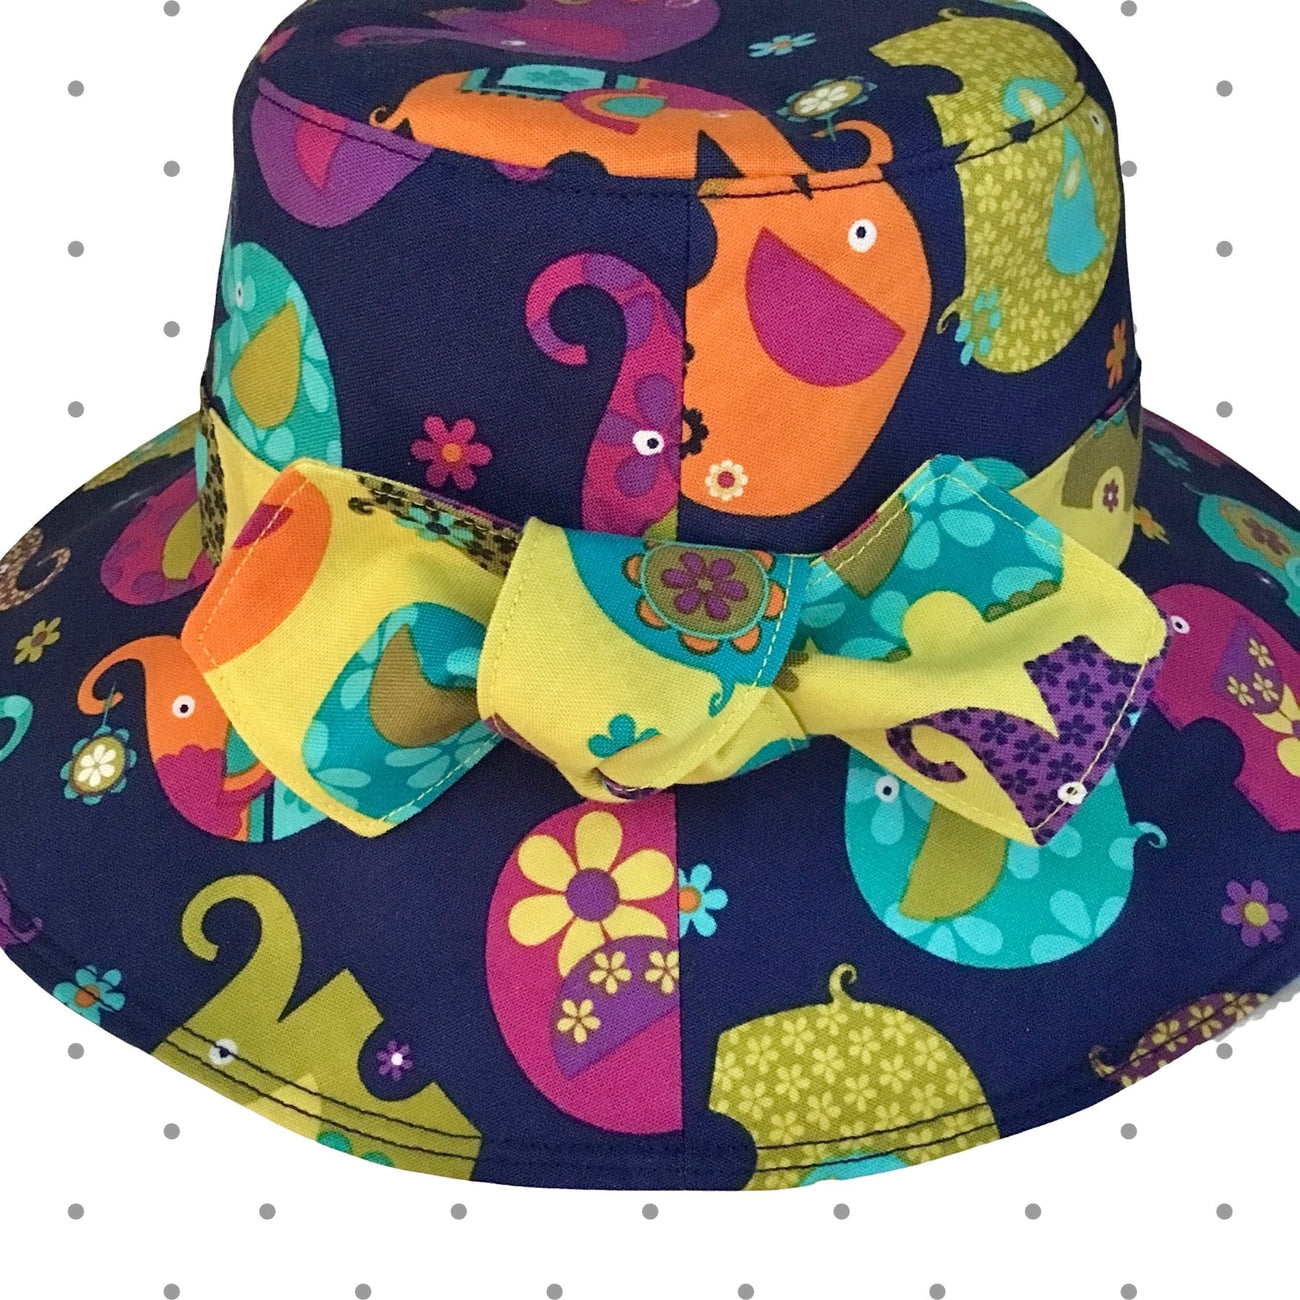 Elephants on Parade ~ Size 12-18 months